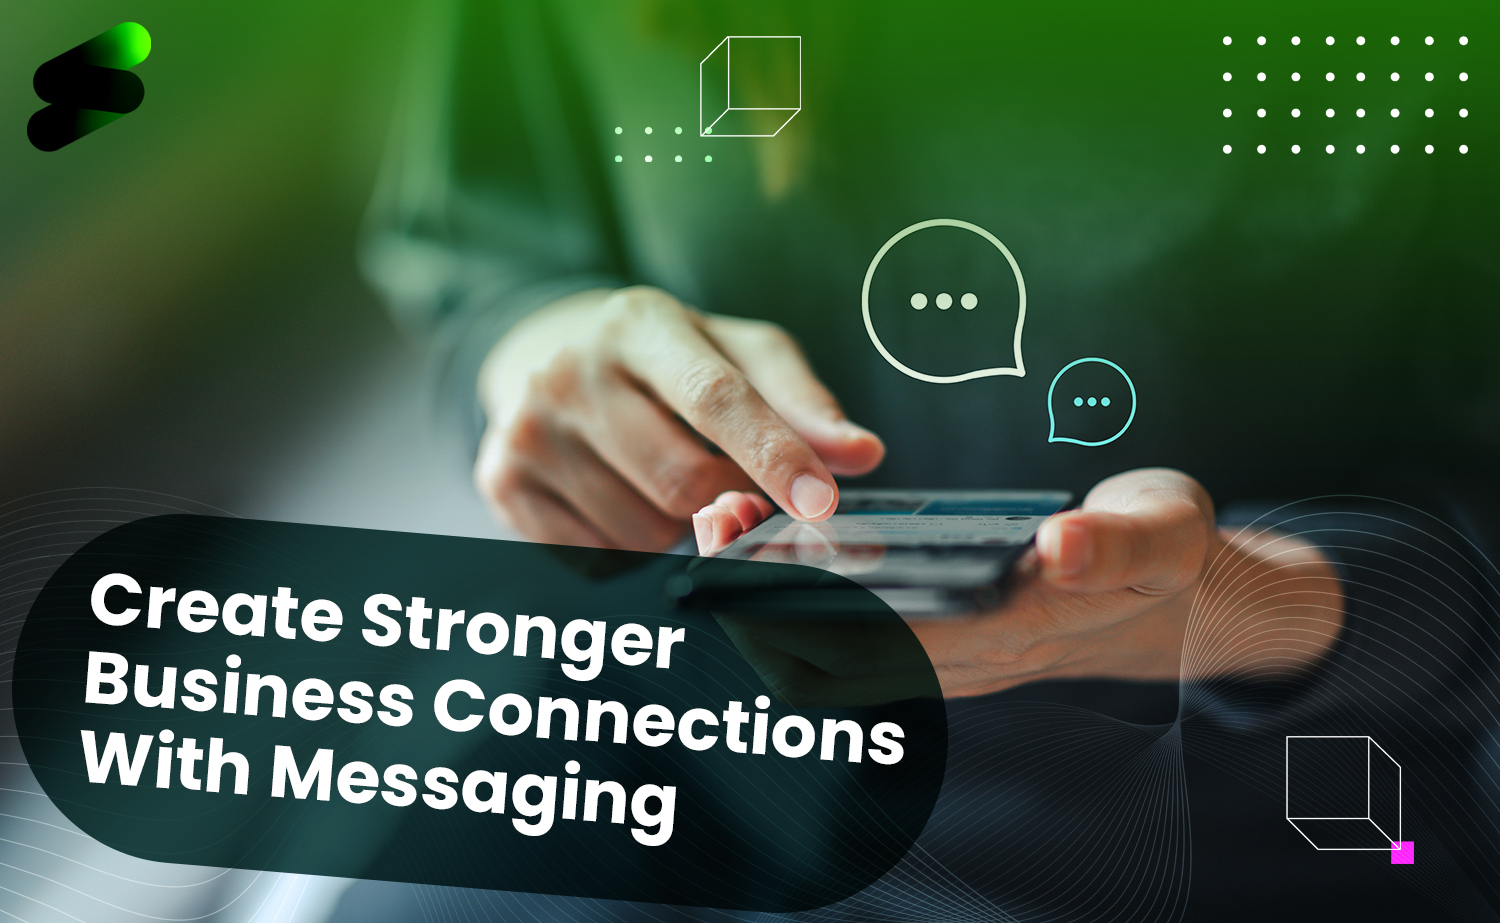 How to Create Stronger Business Connections With Messaging